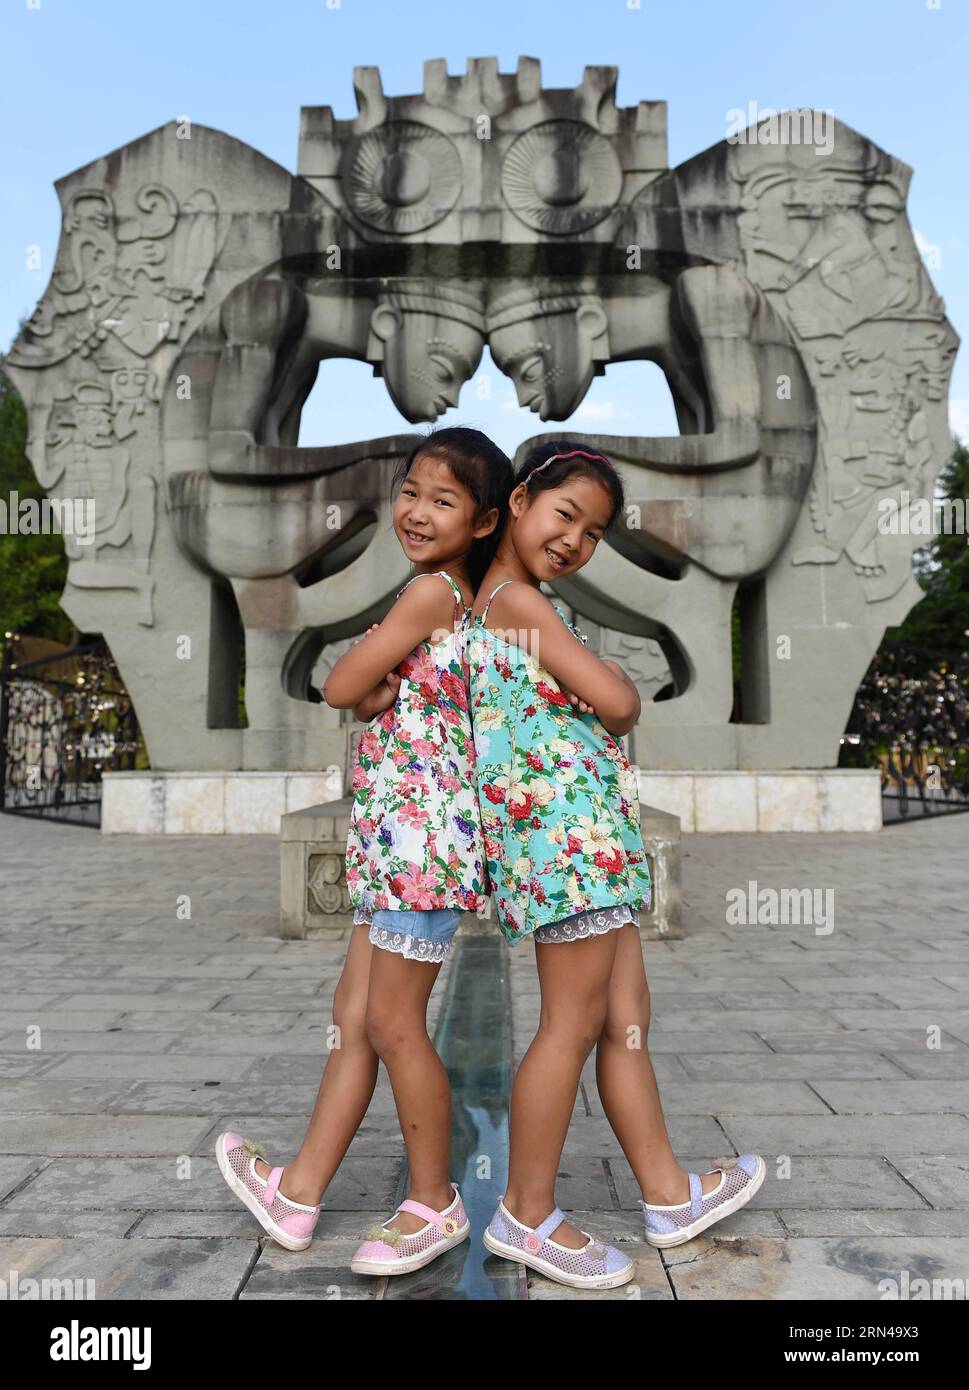 (150514) -- MOJIANG, May 12, 2015 -- Twin sisters Jin Meixian (L) and Jin Huixian play at a park in Mojiang Hani Autonomous County, southwest China s Yunnan Province, May 12, 2015. Twin sisters Jin Meixian and Jin Huixian, 7, live with their mother Wang Fei, who opens a cold drink store. Their father does business in another province. Meixian, the older, loves music and wants to be a musical teacher. Huixian likes dancing, and wants to go to college in Beijing. We always feel connected. Sometimes we find out that we are singing the same song, even the same lyrics. By coincidence, there are ten Stock Photo